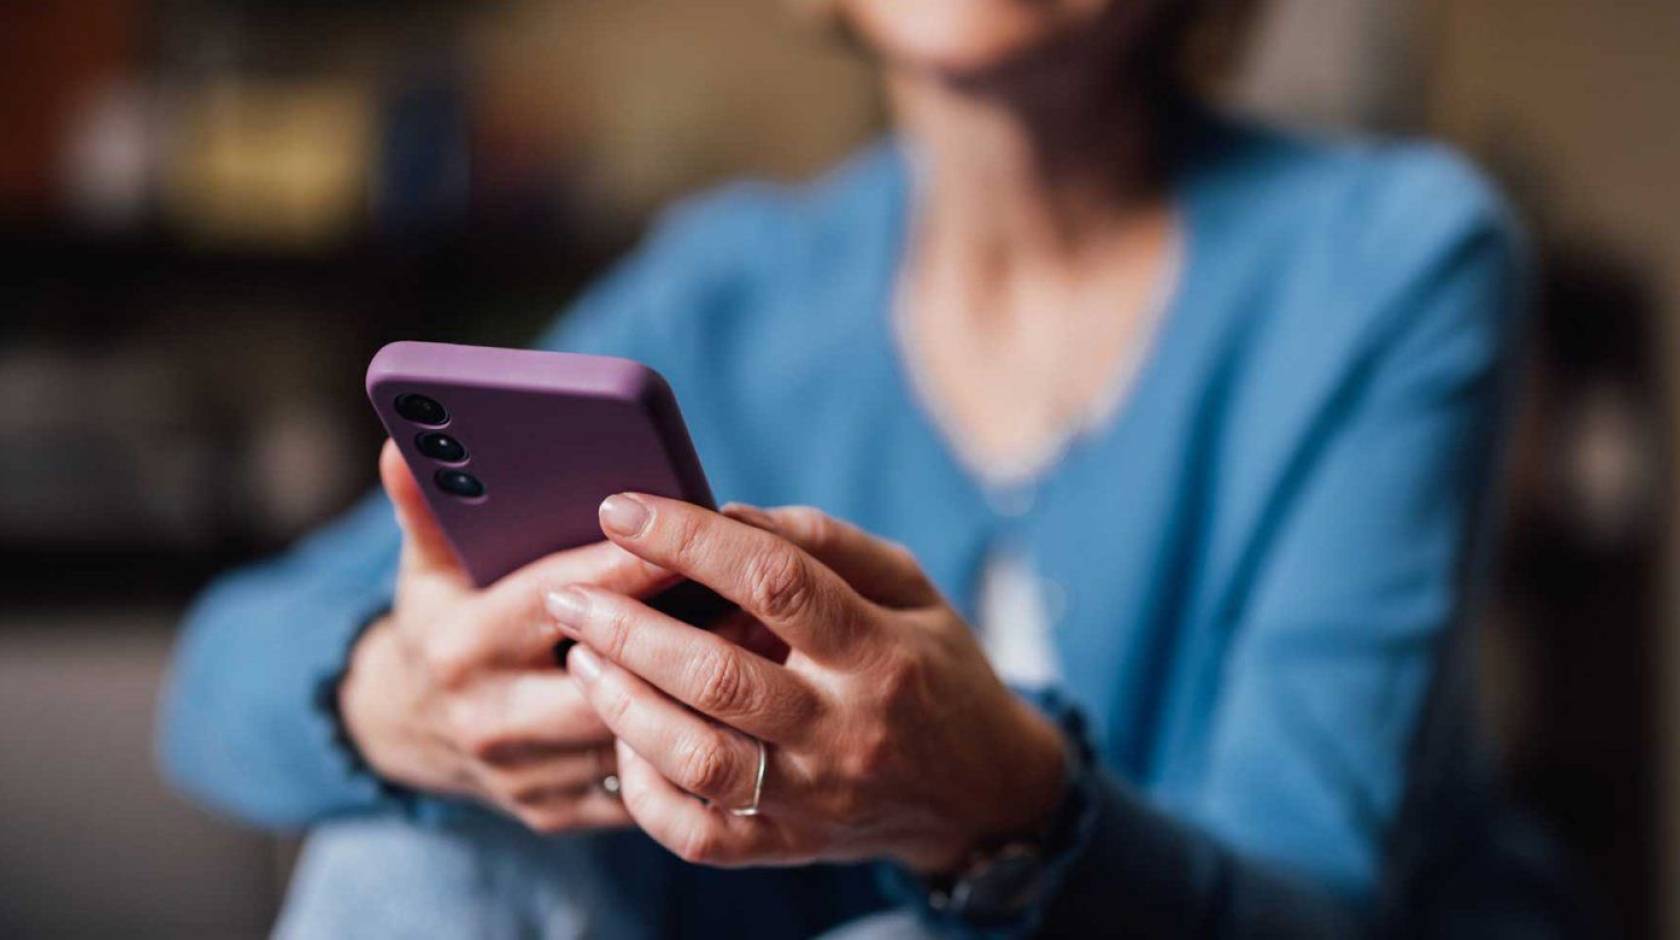 Senior woman uses smartphone; smartphone is central to image, woman's face is cropped out and body blurred